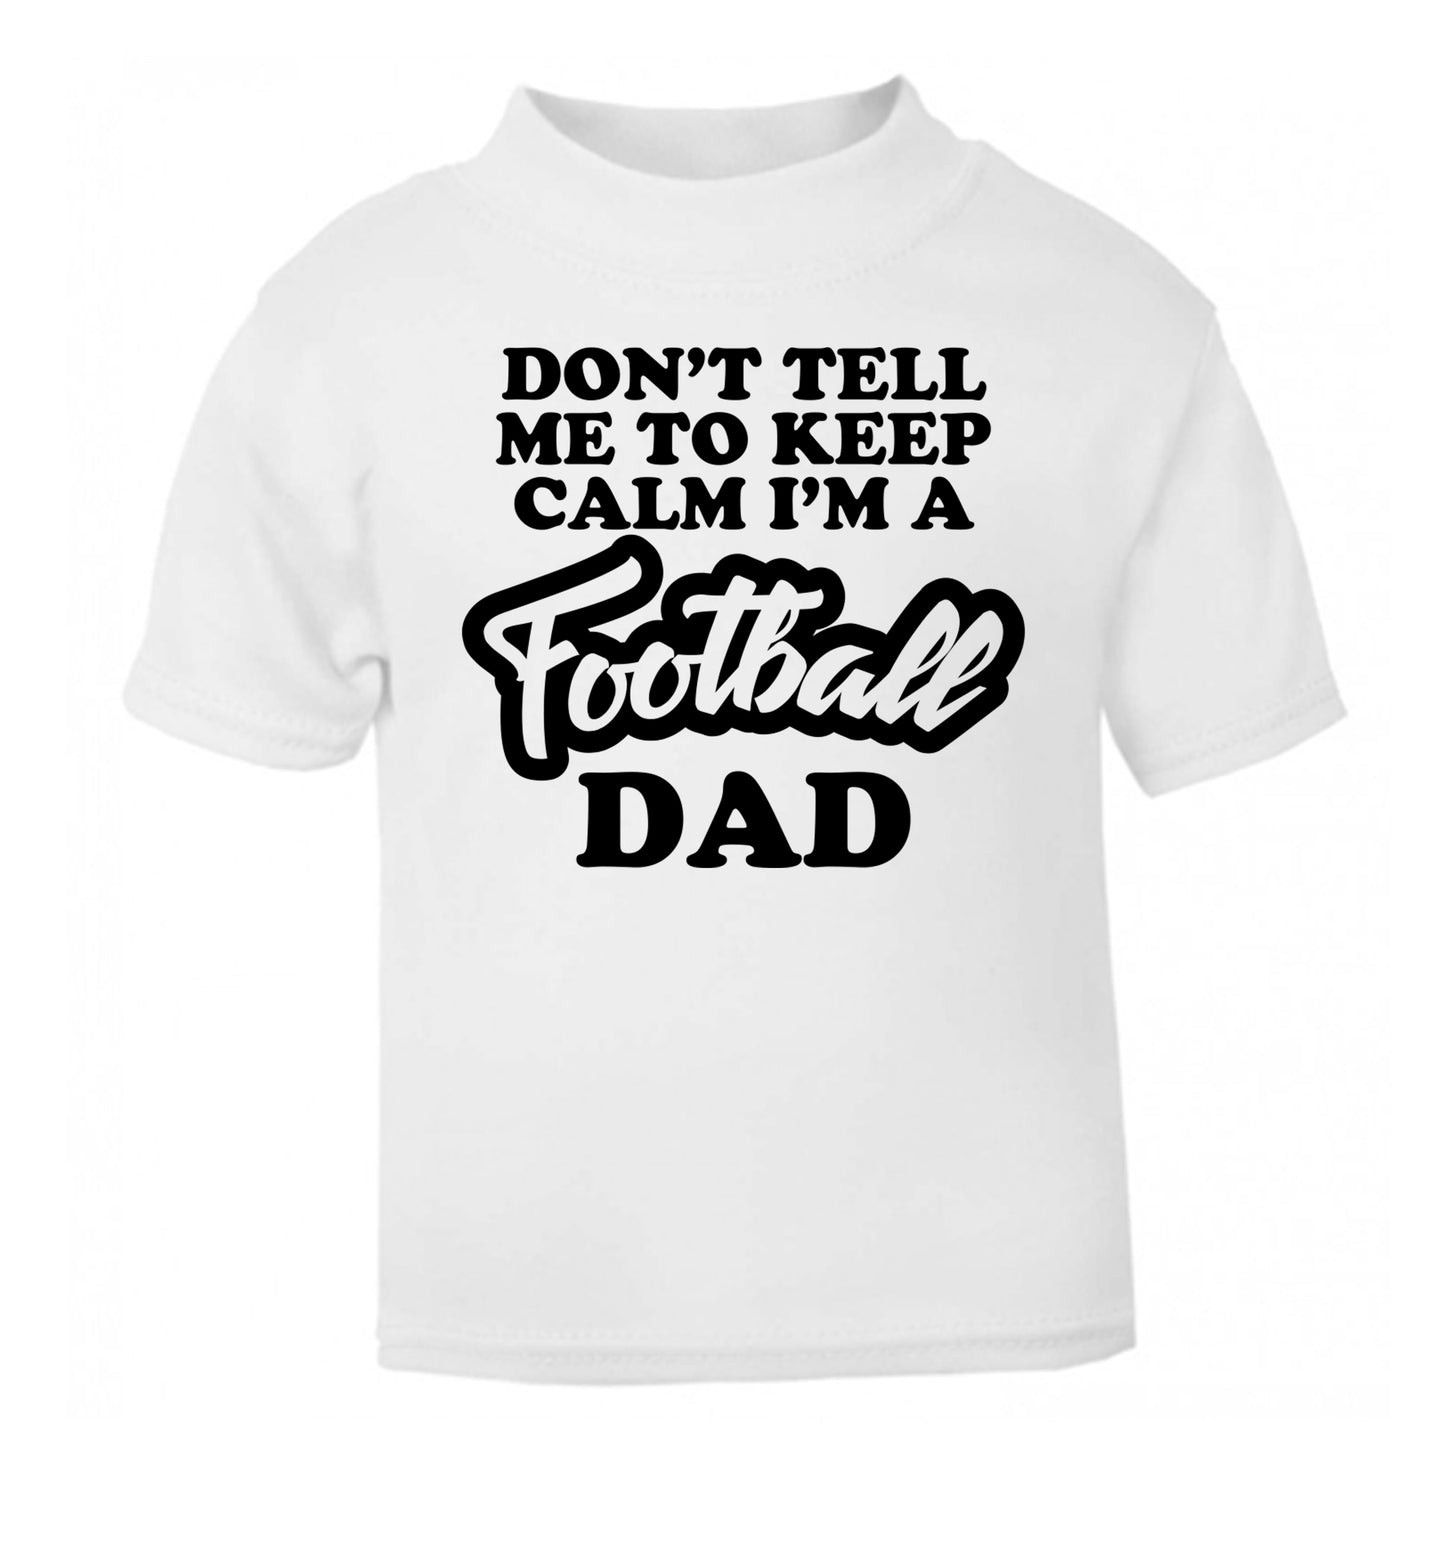 Don't tell me to keep calm I'm a football grandad white Baby Toddler Tshirt 2 Years